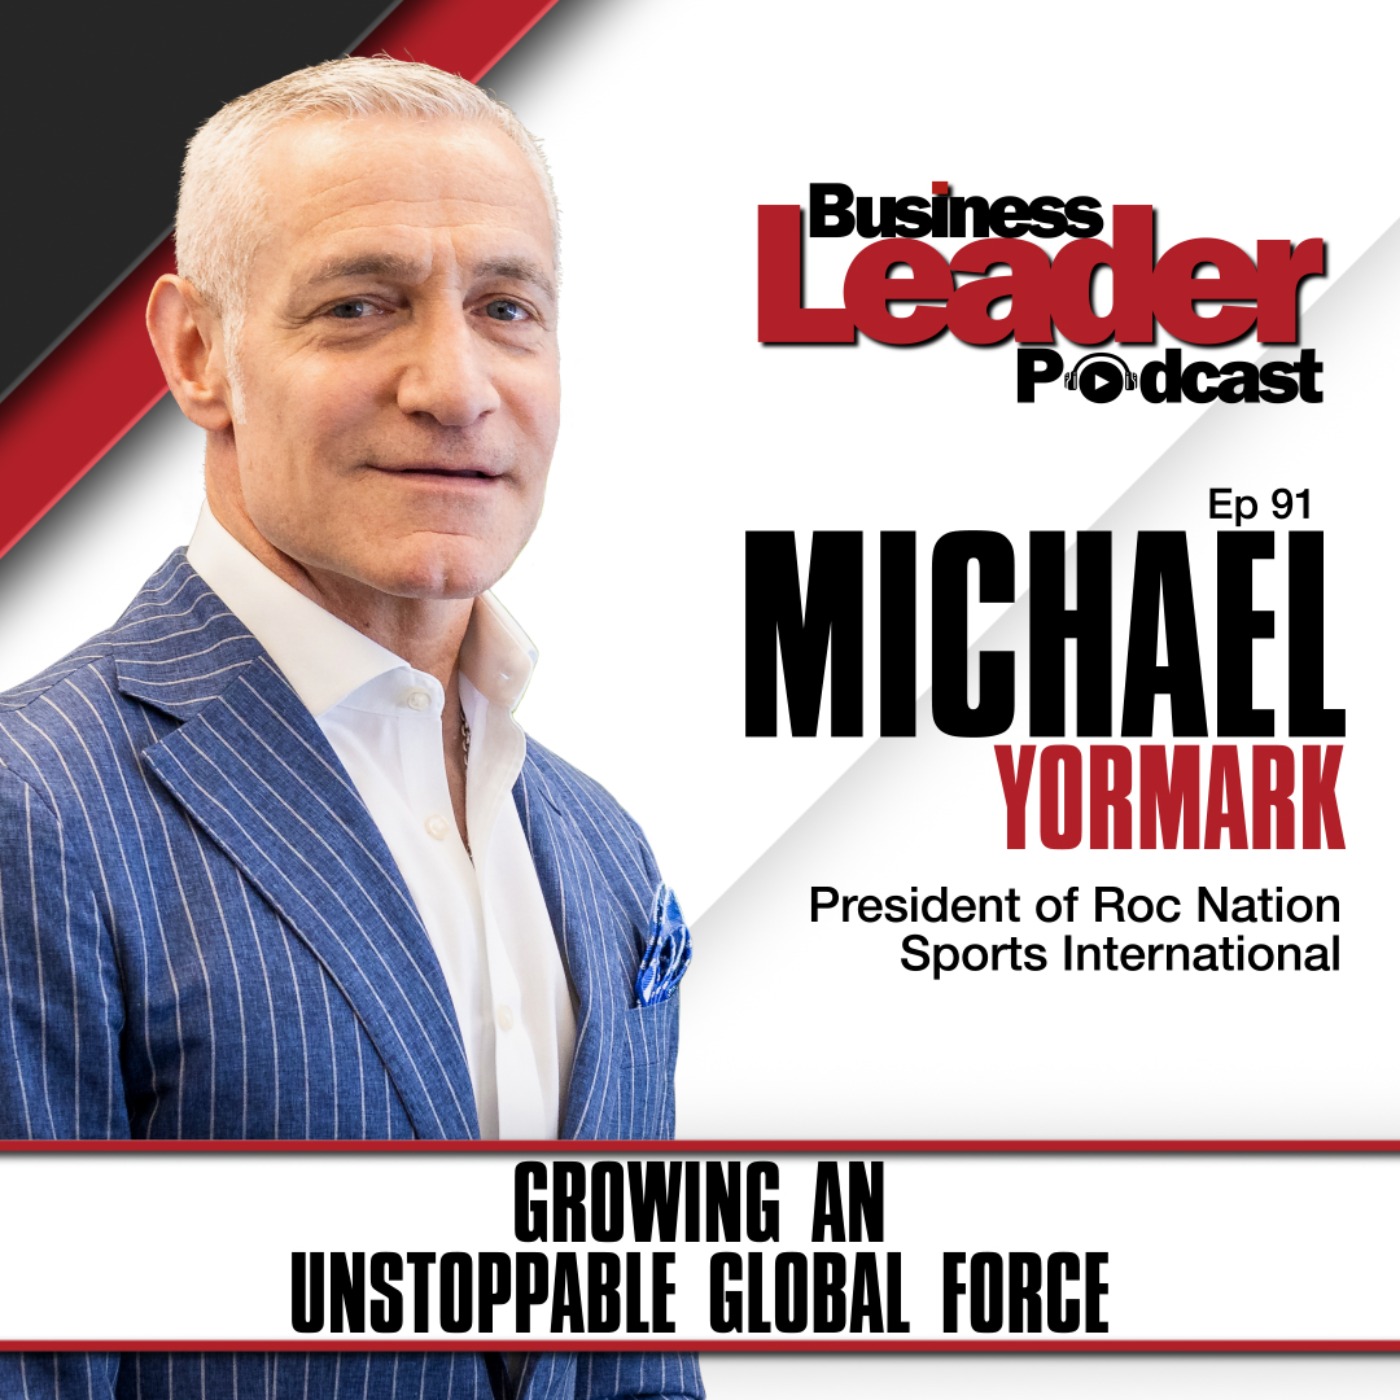 Michael Yormark: Growing an unstoppable global force